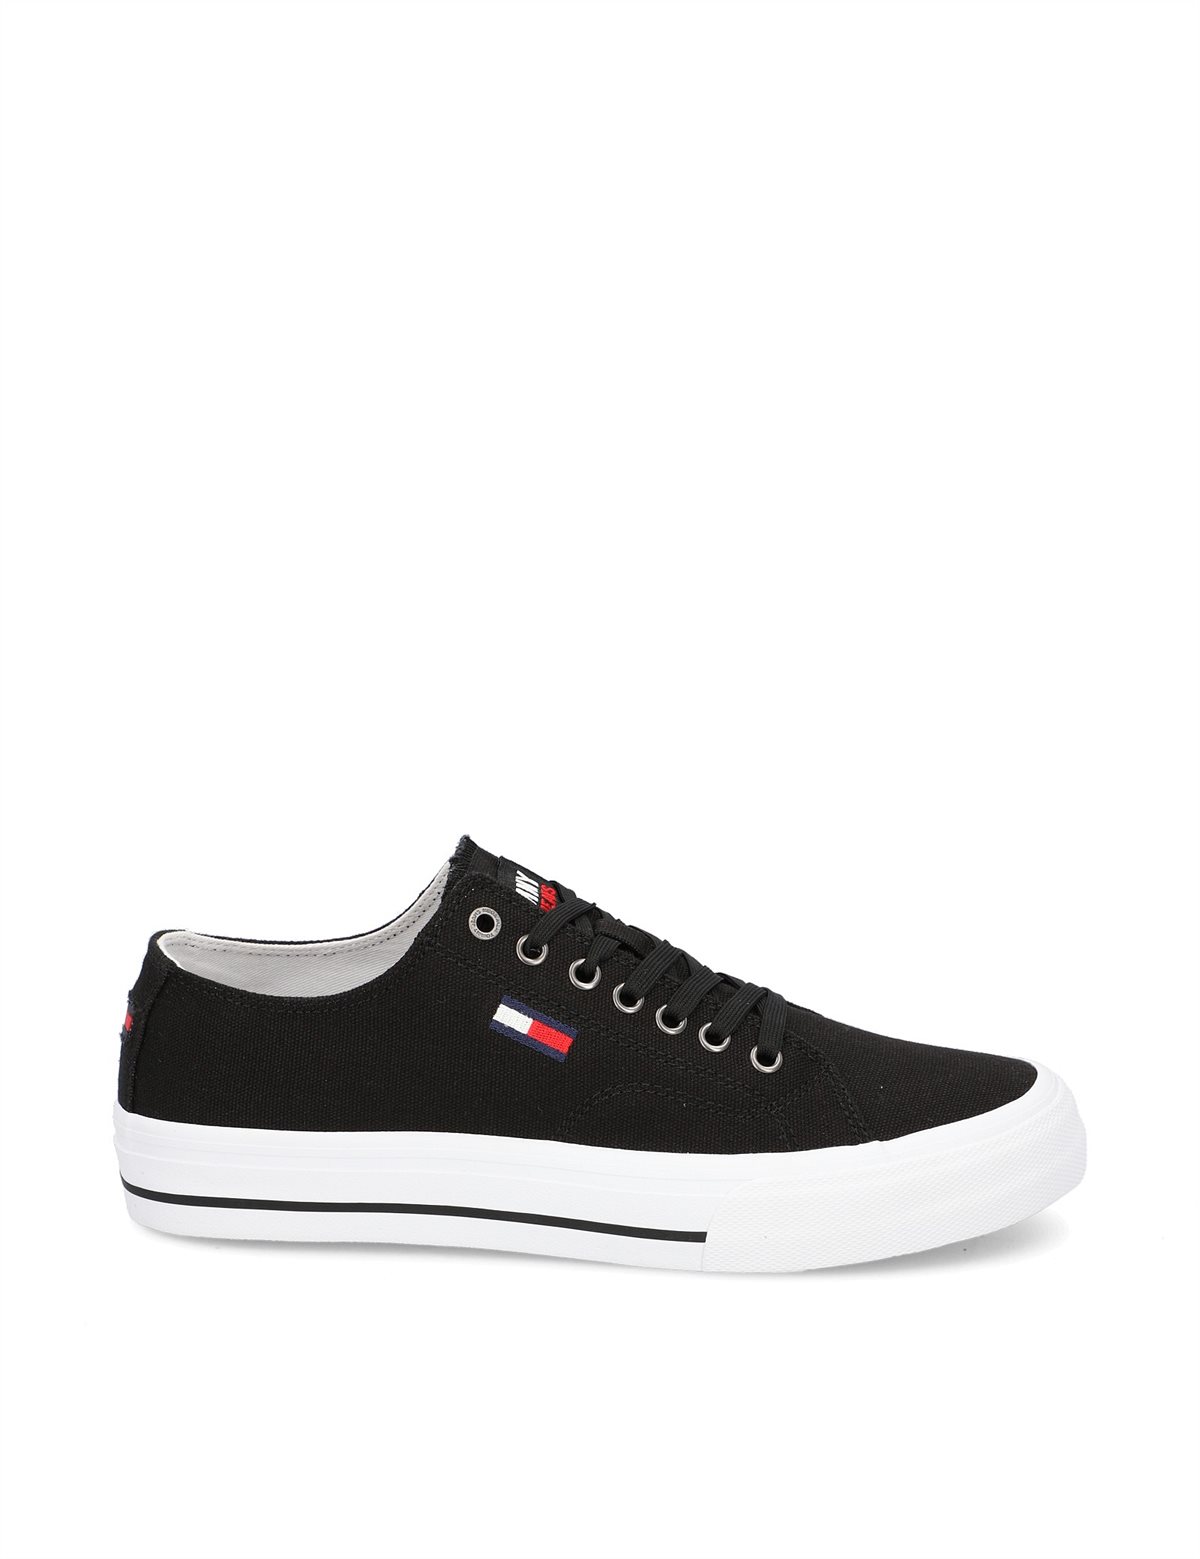 HUMANIC 02 Tommy Hilfiger Canvas Sneaker EUR 69,95 2421109130